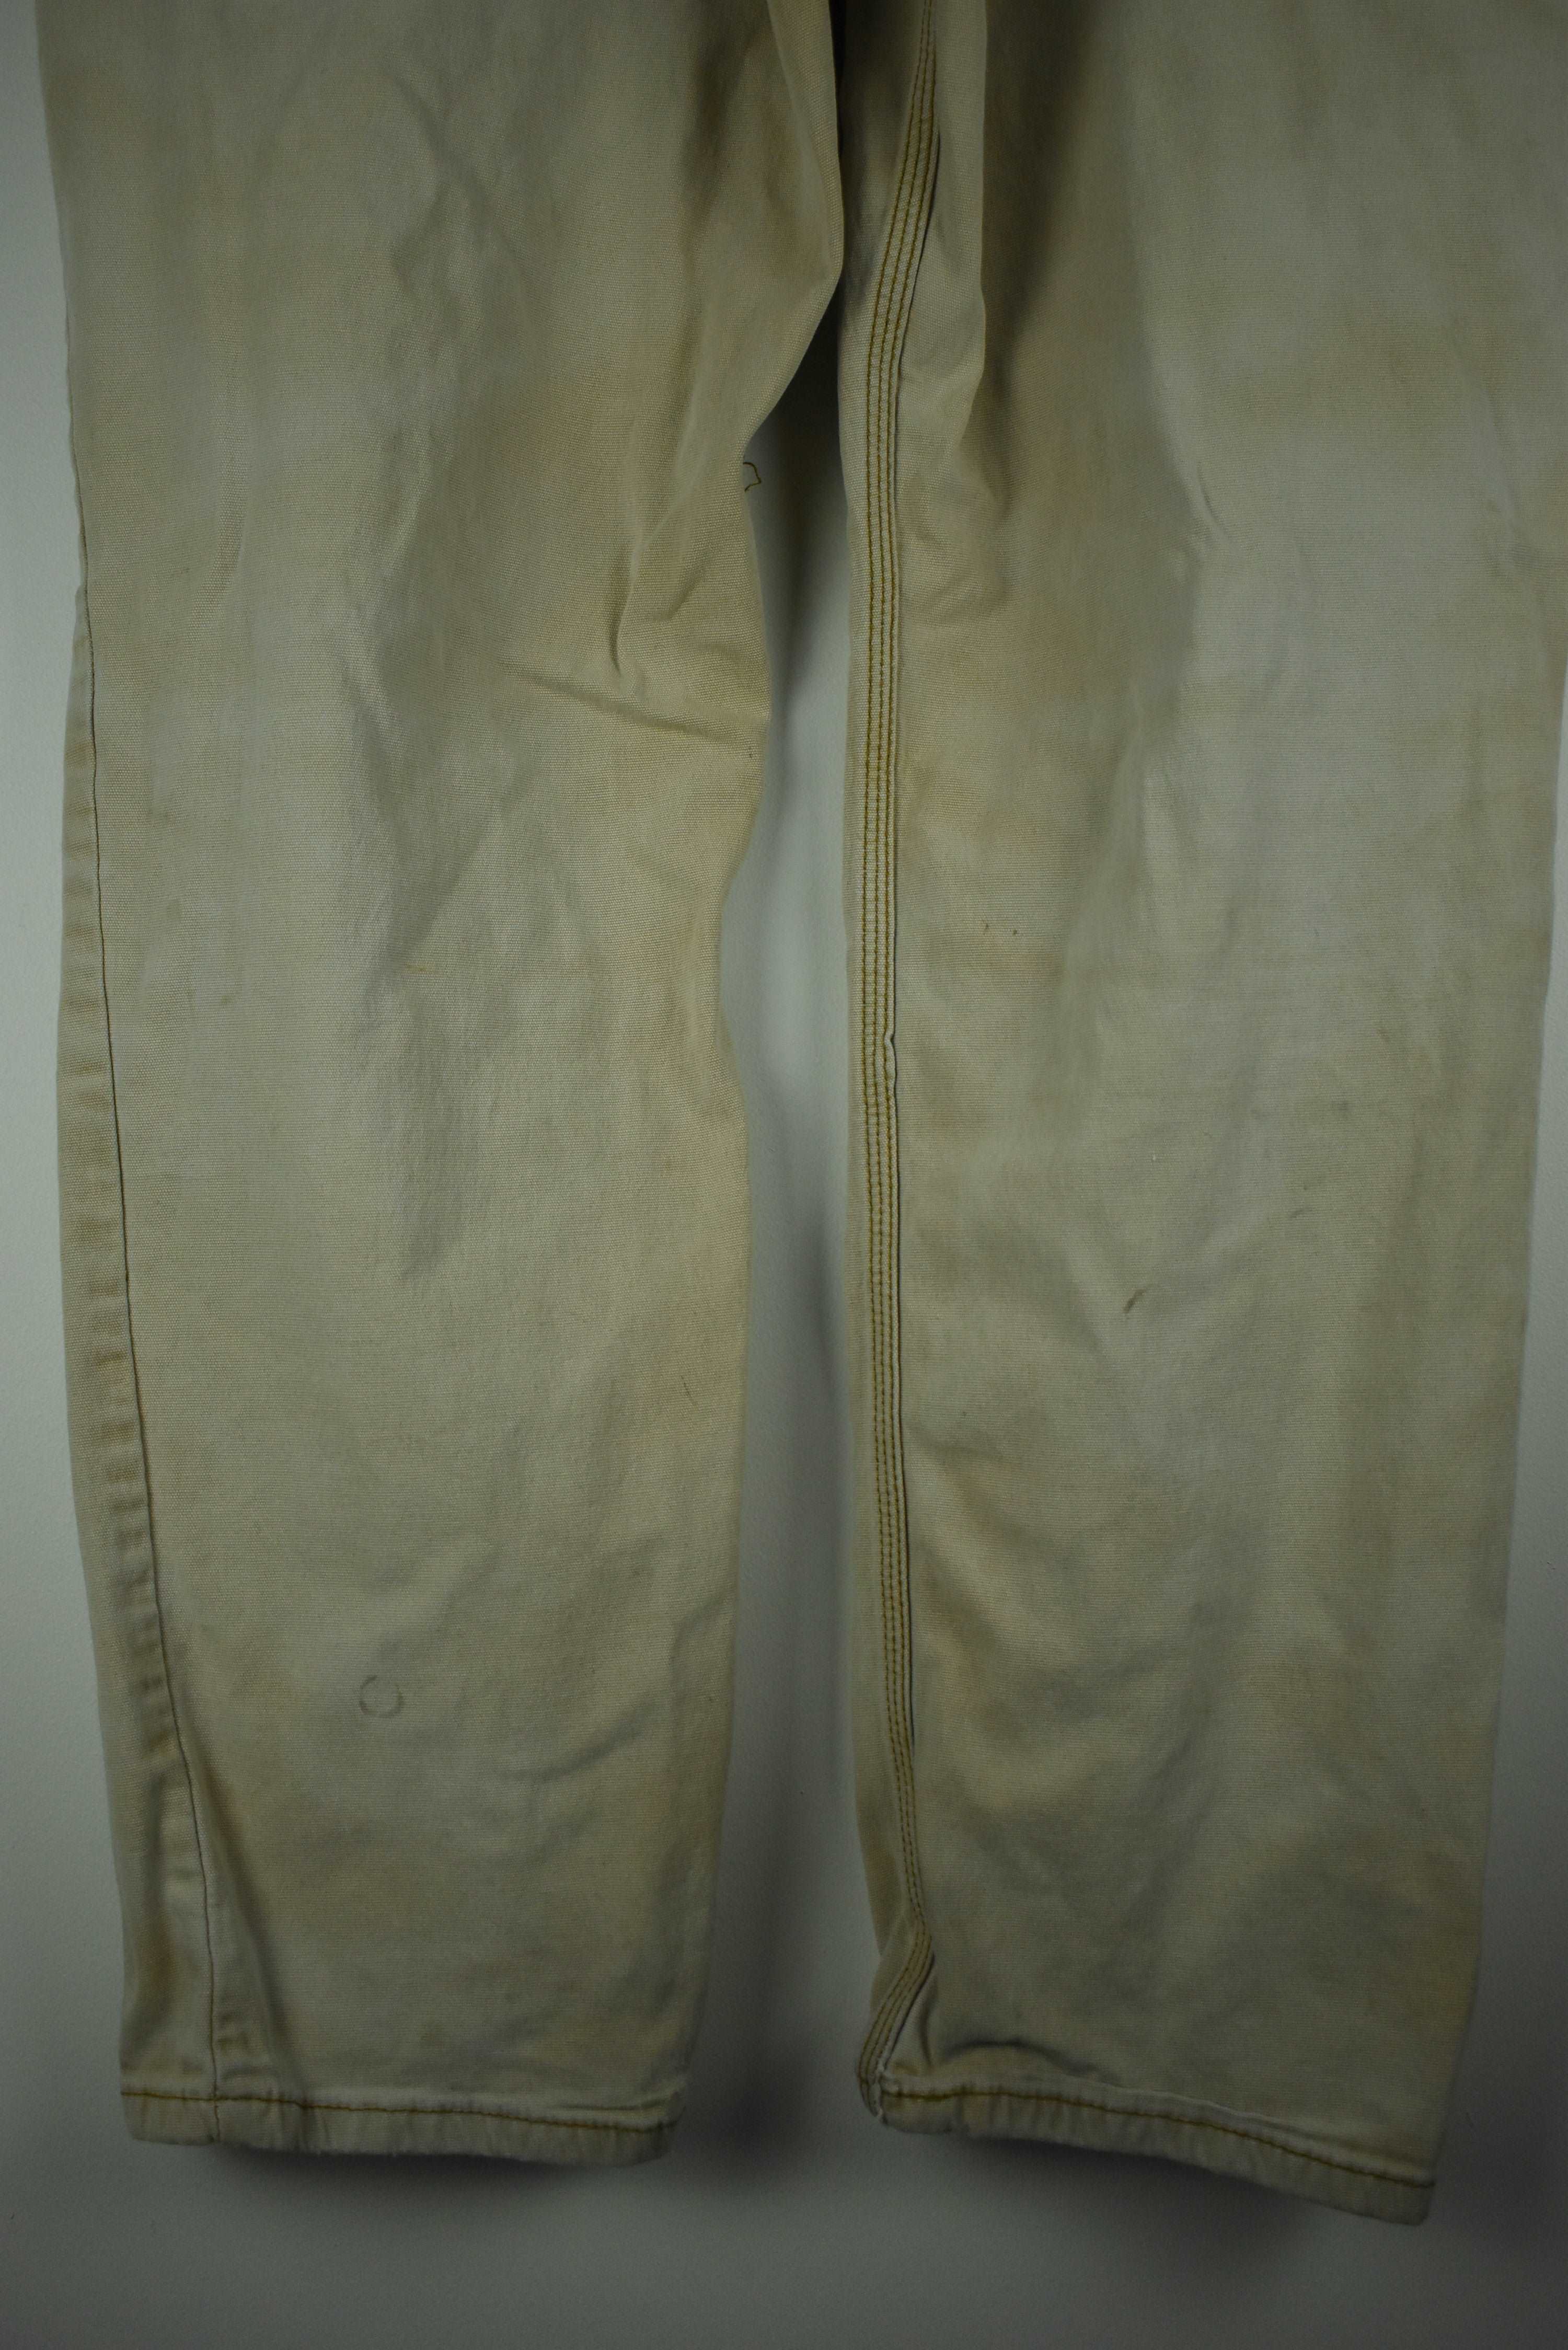 Vintage Carhartt Classic Pants Relaxed Fit 36 x 30